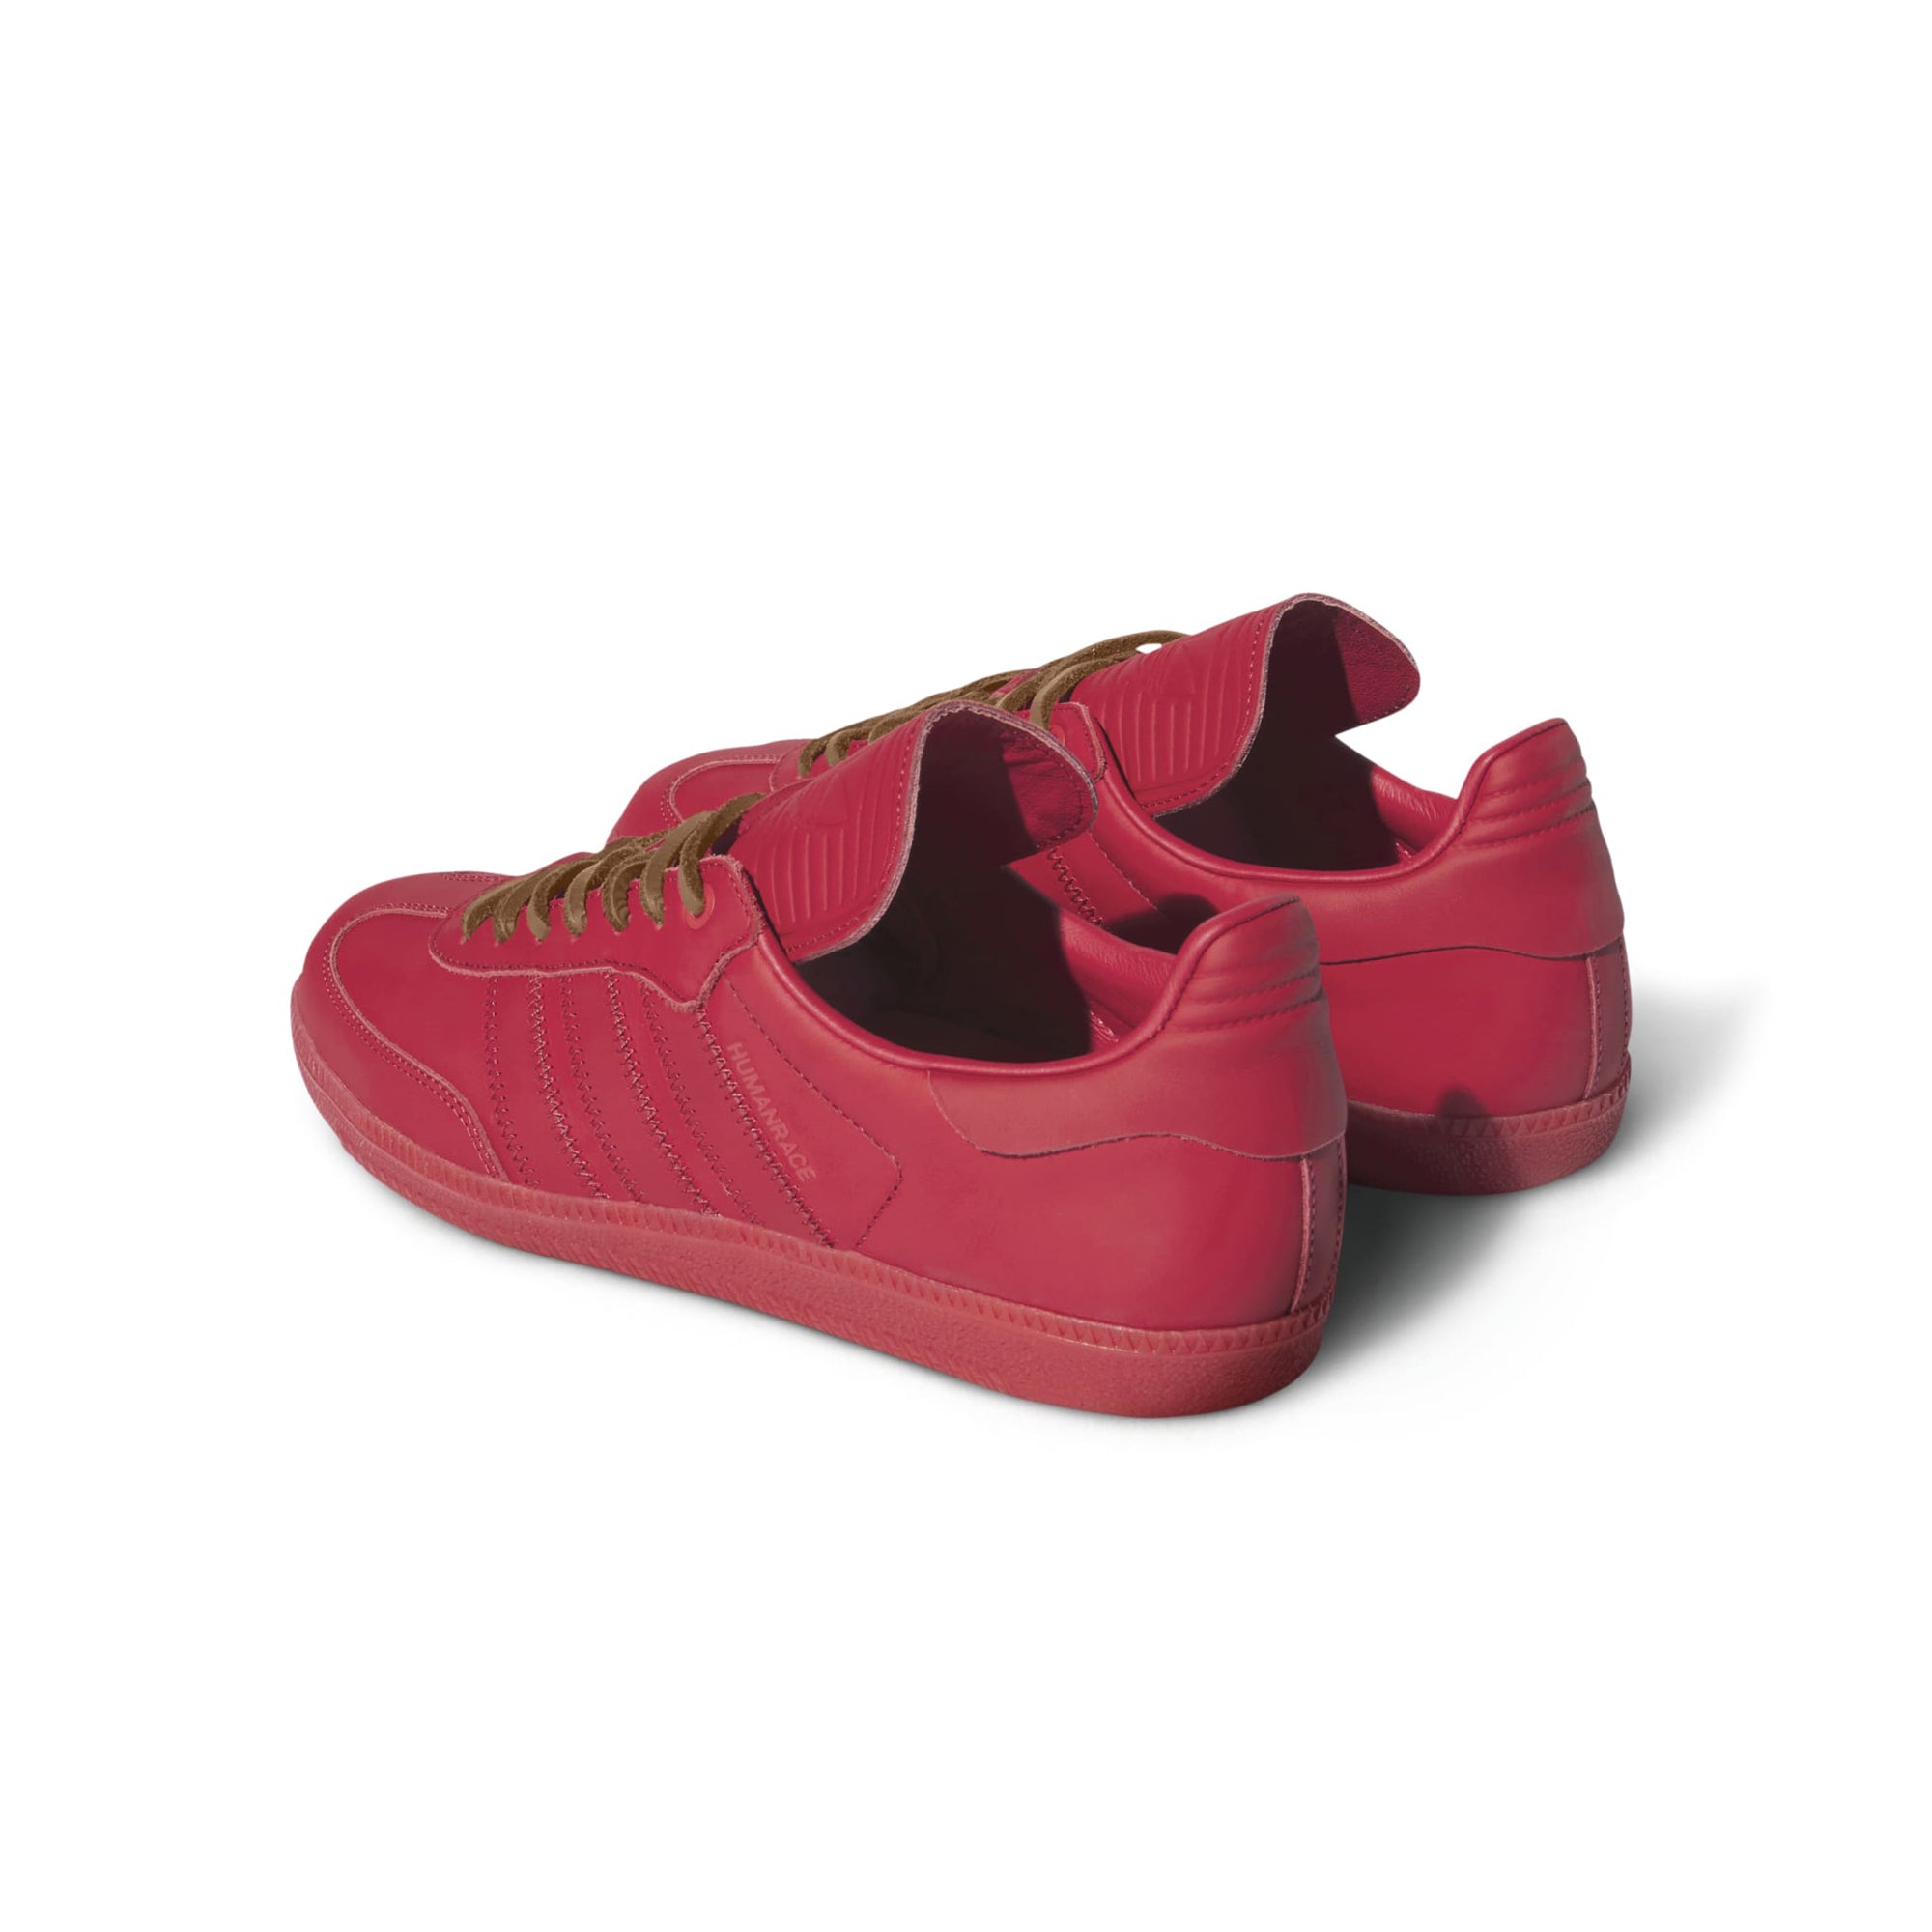 Buy Marvel Boy's MAPBCS2111 Red Sneakers - 1 UK/India (33 EU)  (MAPBCS2111_RED) at Amazon.in